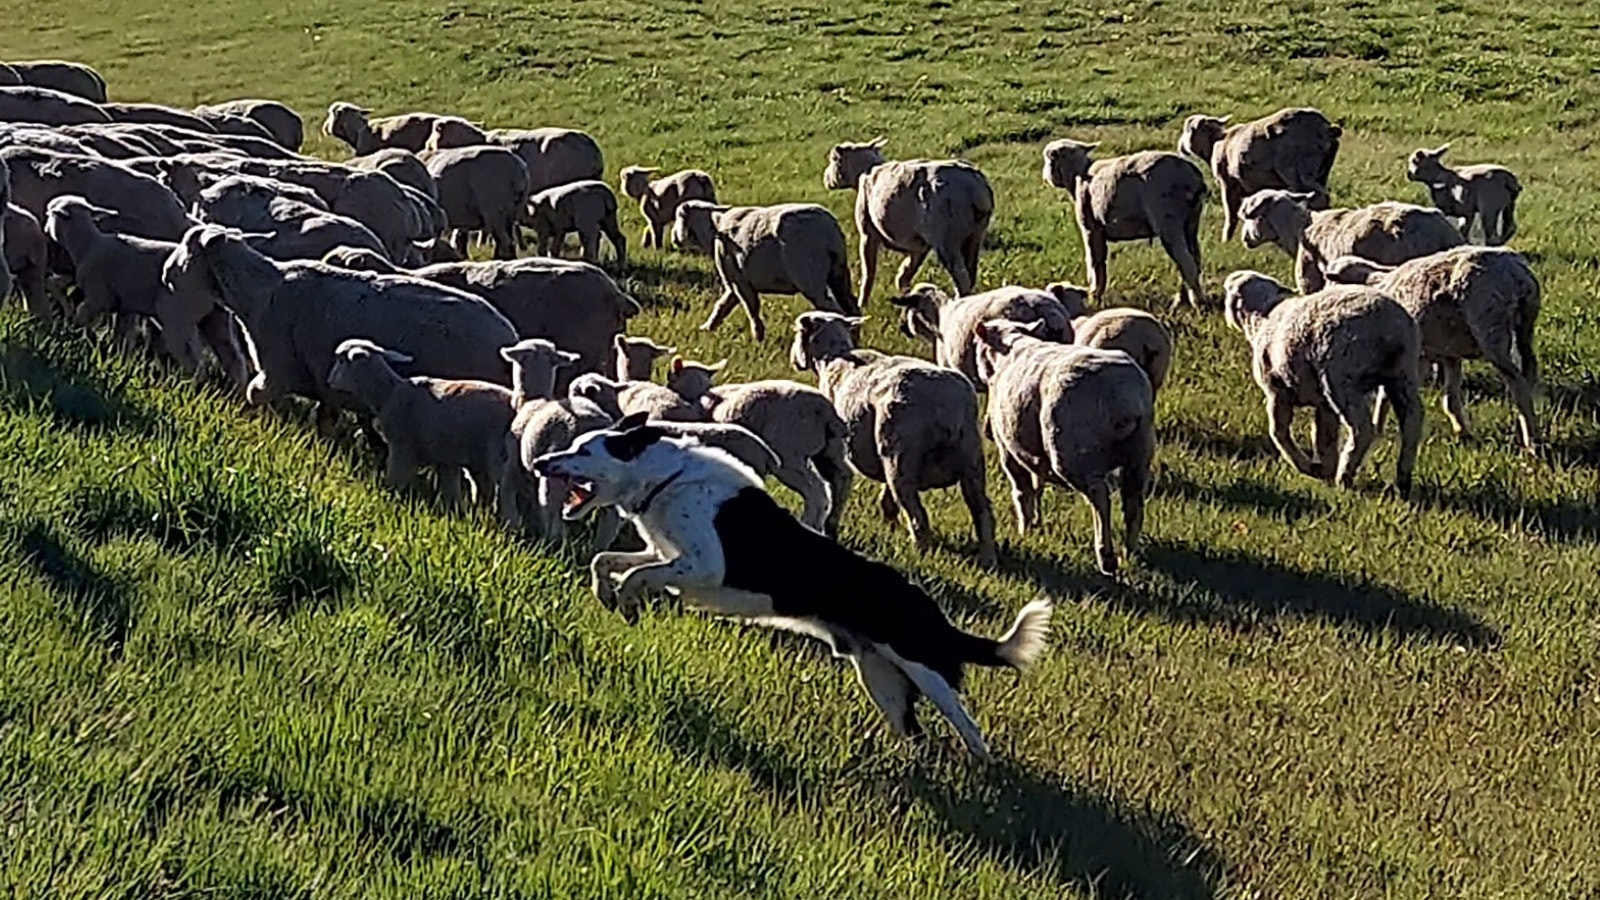 Tate, Mike Miller's 3-year-old herding dog, was happy as all get-out herding sheep through Gillette on Saturday.